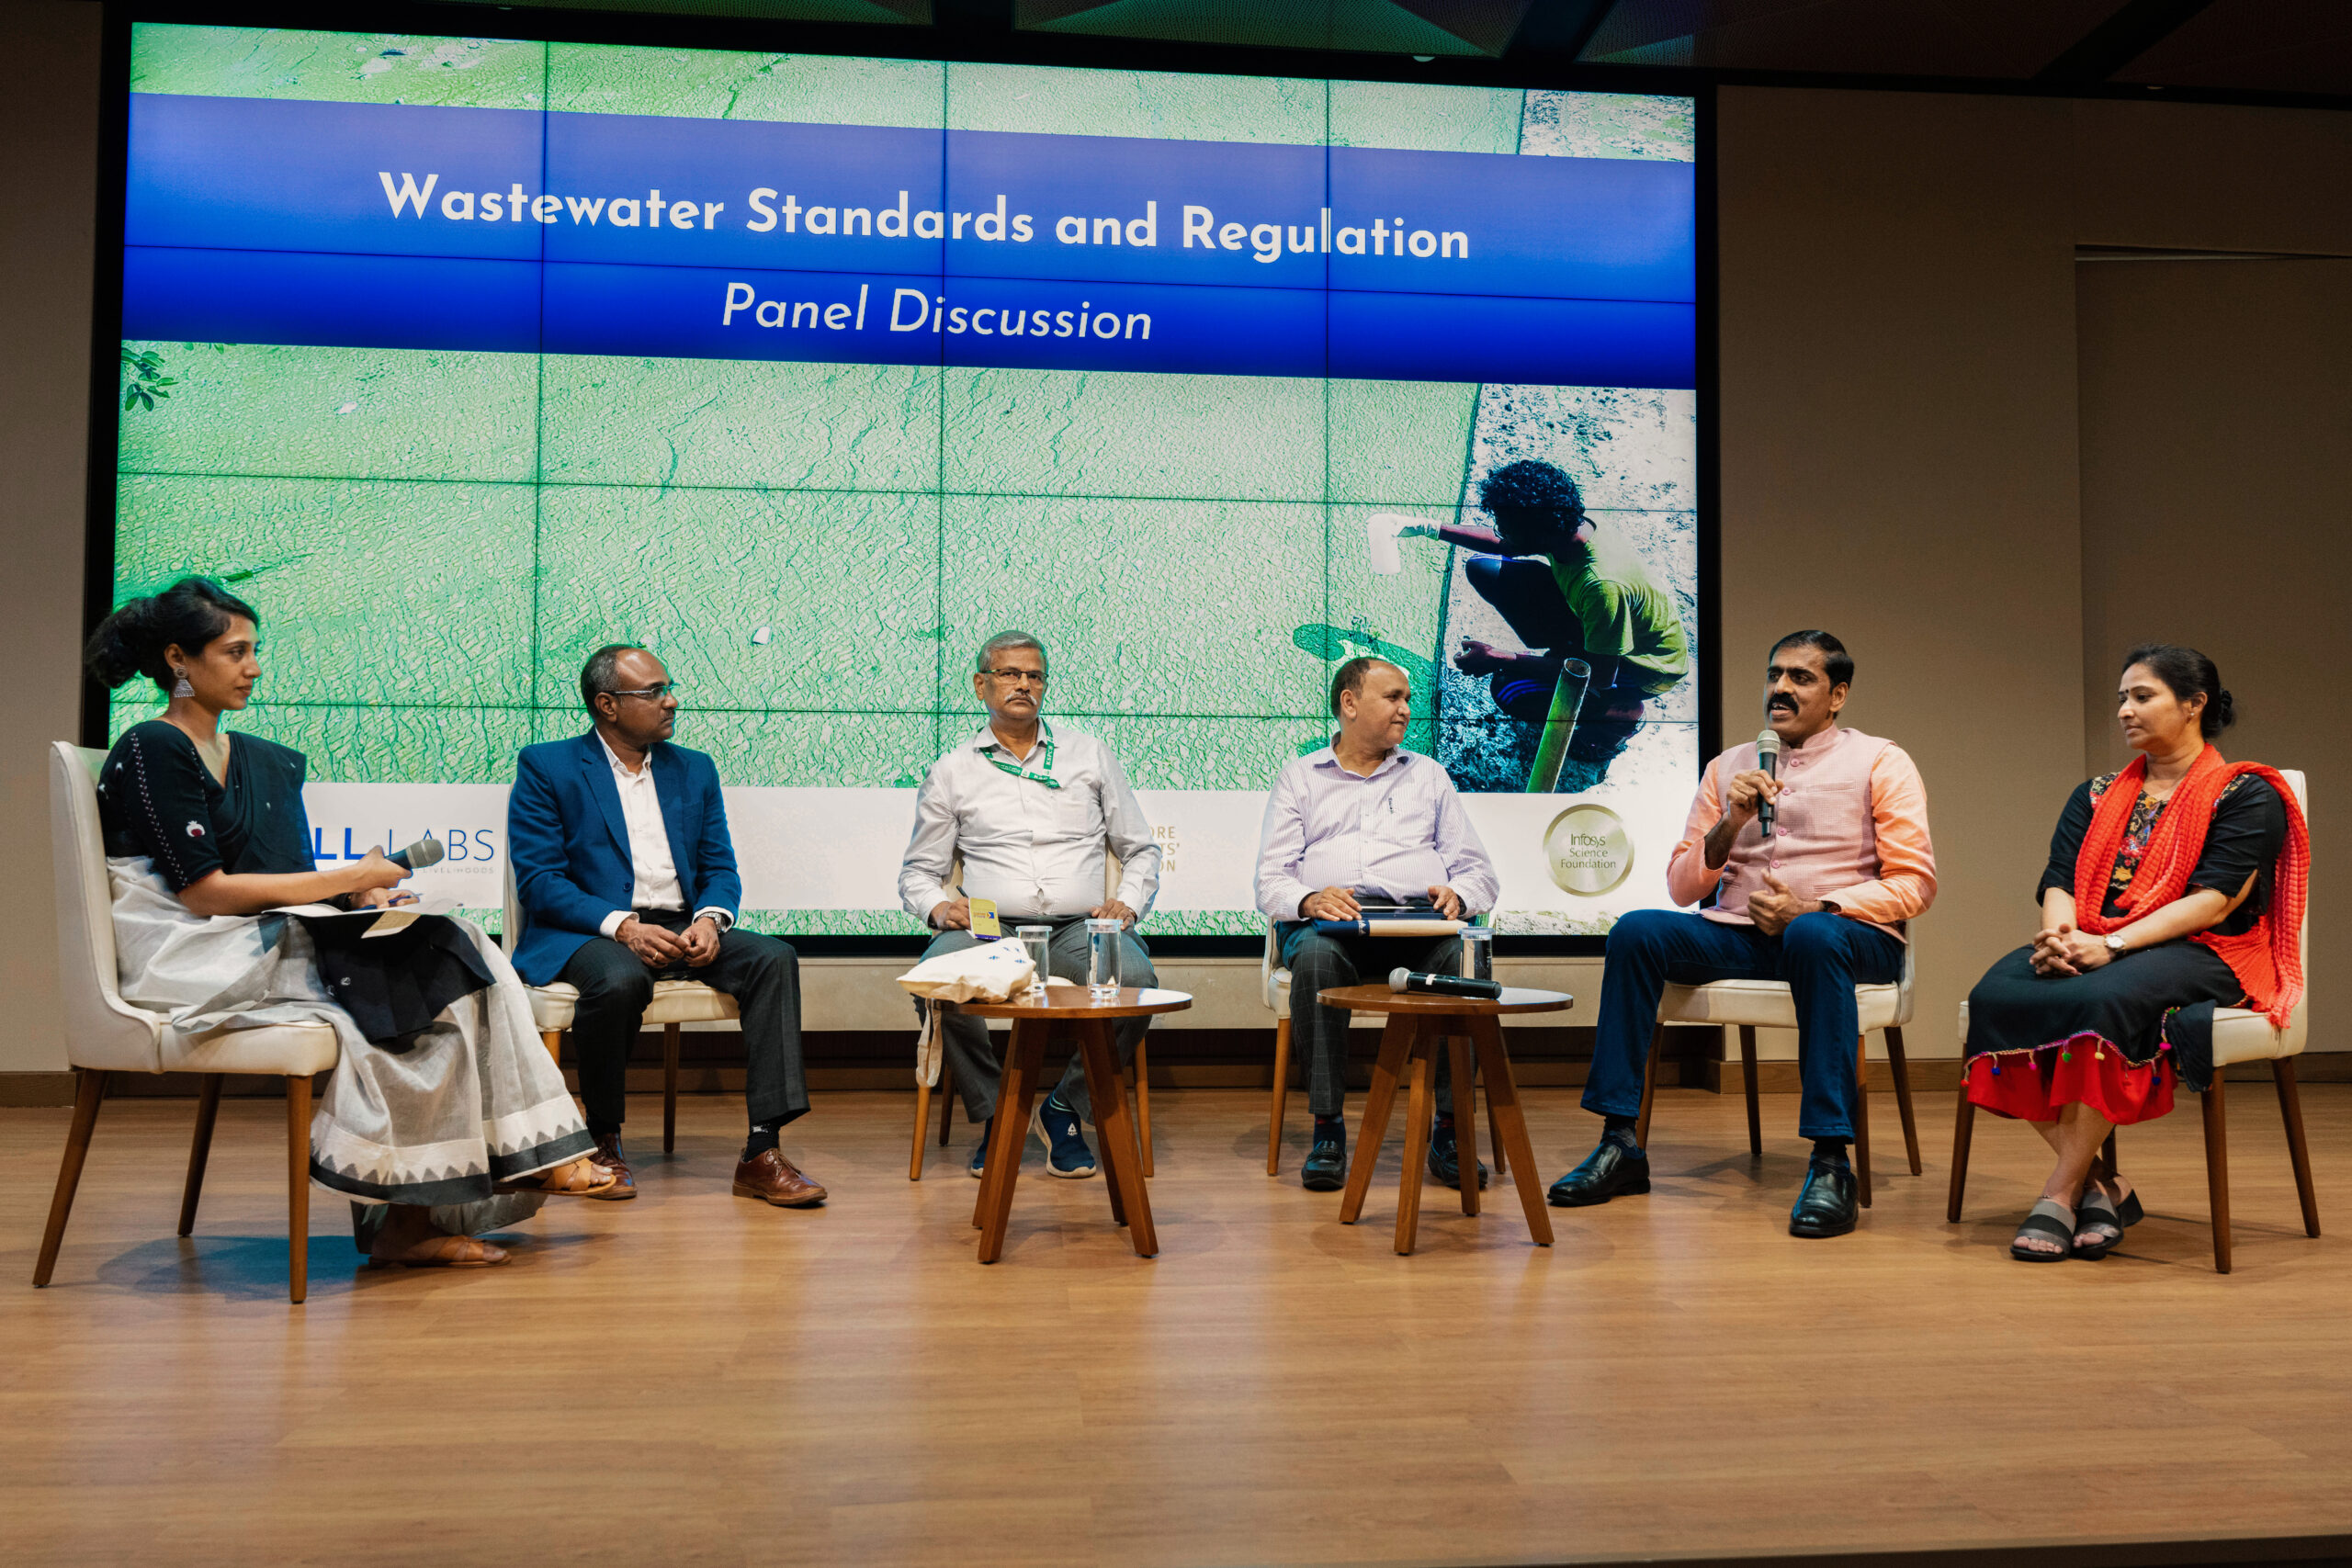 Urban Water programme lead, Ms Shreya Nath, lead a panel discussion on wastewater standards and reuse with Mr Aditya Rao, Dr Inayathulla M, Mr M Selvarasu, Shri Mahesh T, Dr Shubha Avinash at the Infosys Science Foundation on October 17. The conference was organised by WELL Labs with BAF and EAWAG.